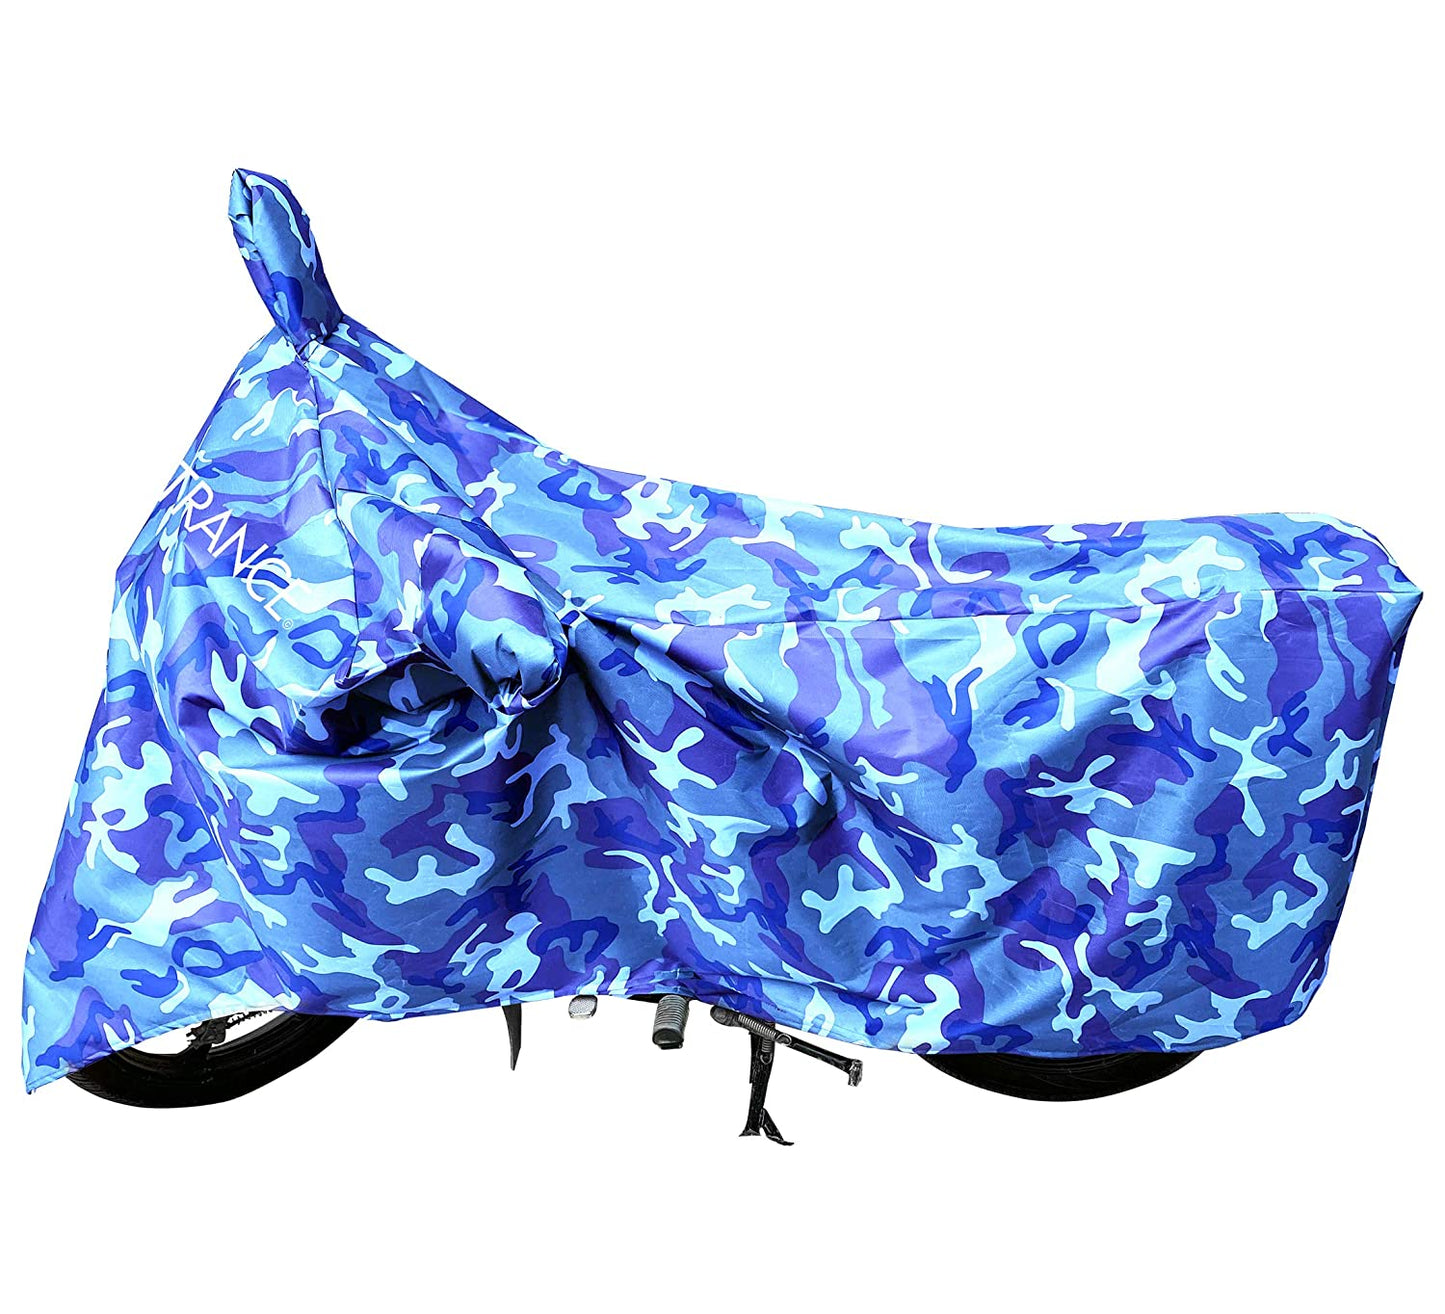 MotoTrance Jungle Bike Body Covers For Honda VT 1300CX - Interlock-Stitched Waterproof and Heat Resistant with Mirror Pockets